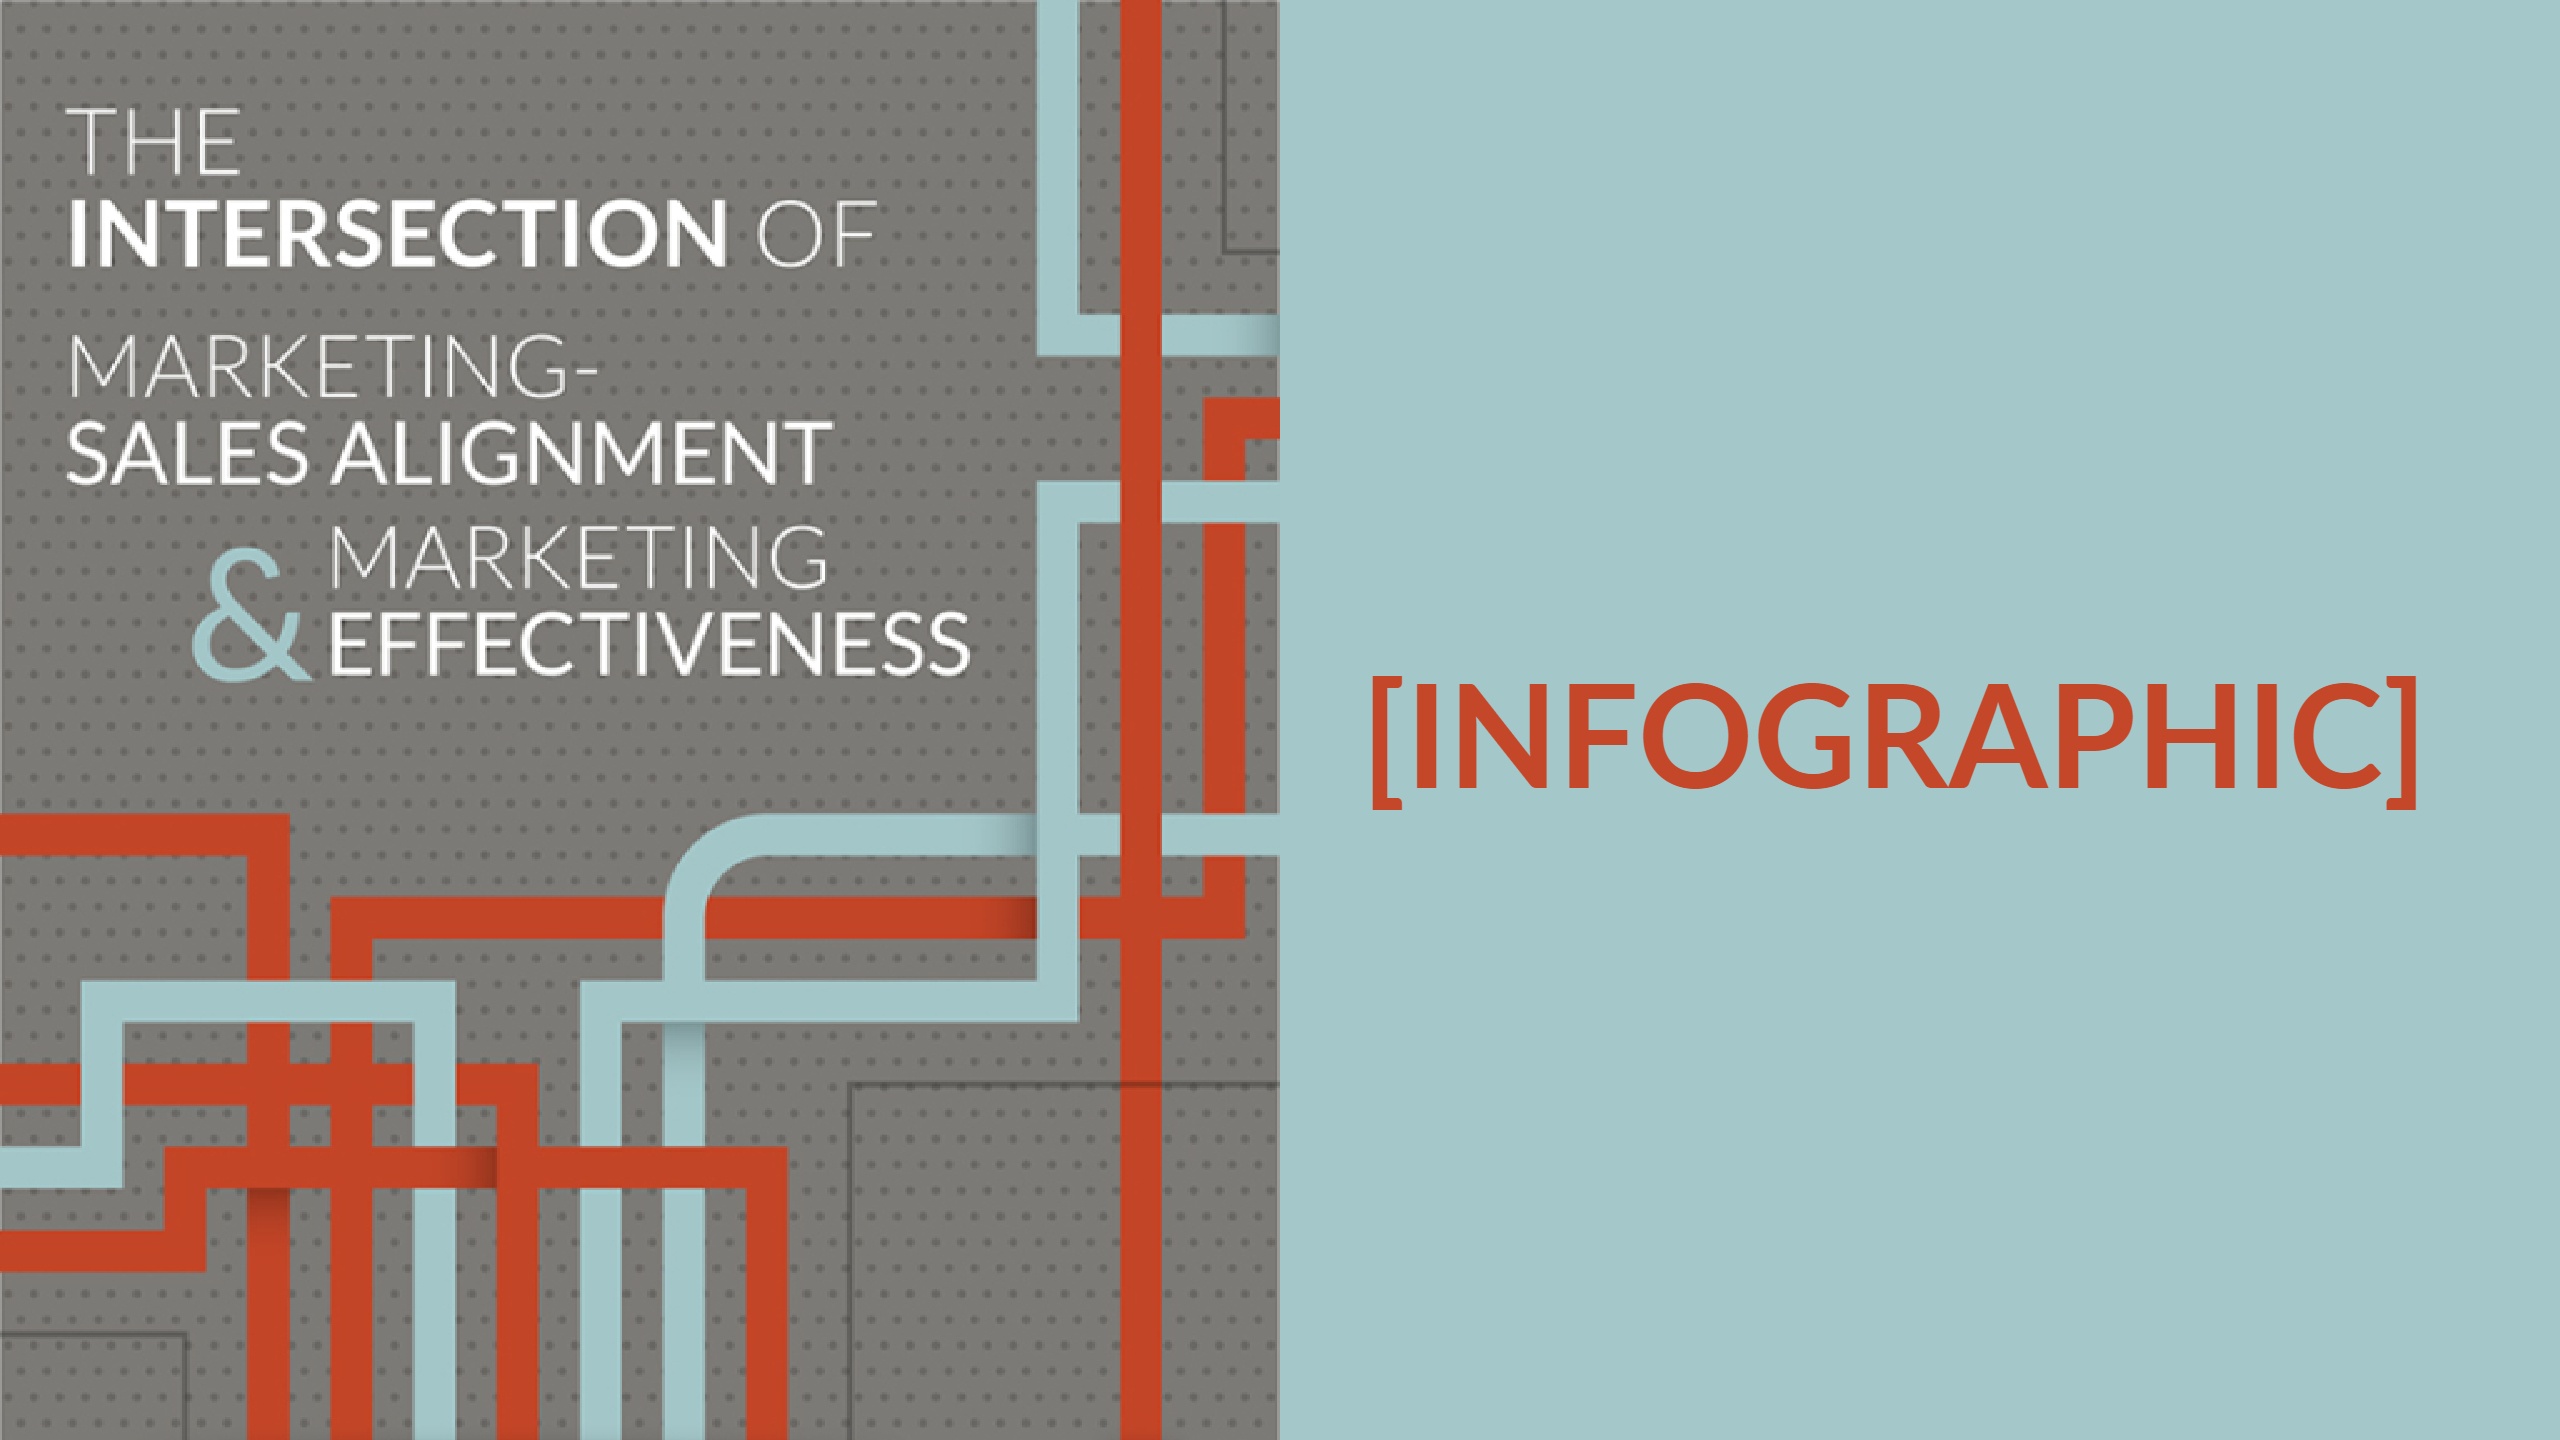 Marketing Infographic: Where Alignment & Effectiveness Intersect